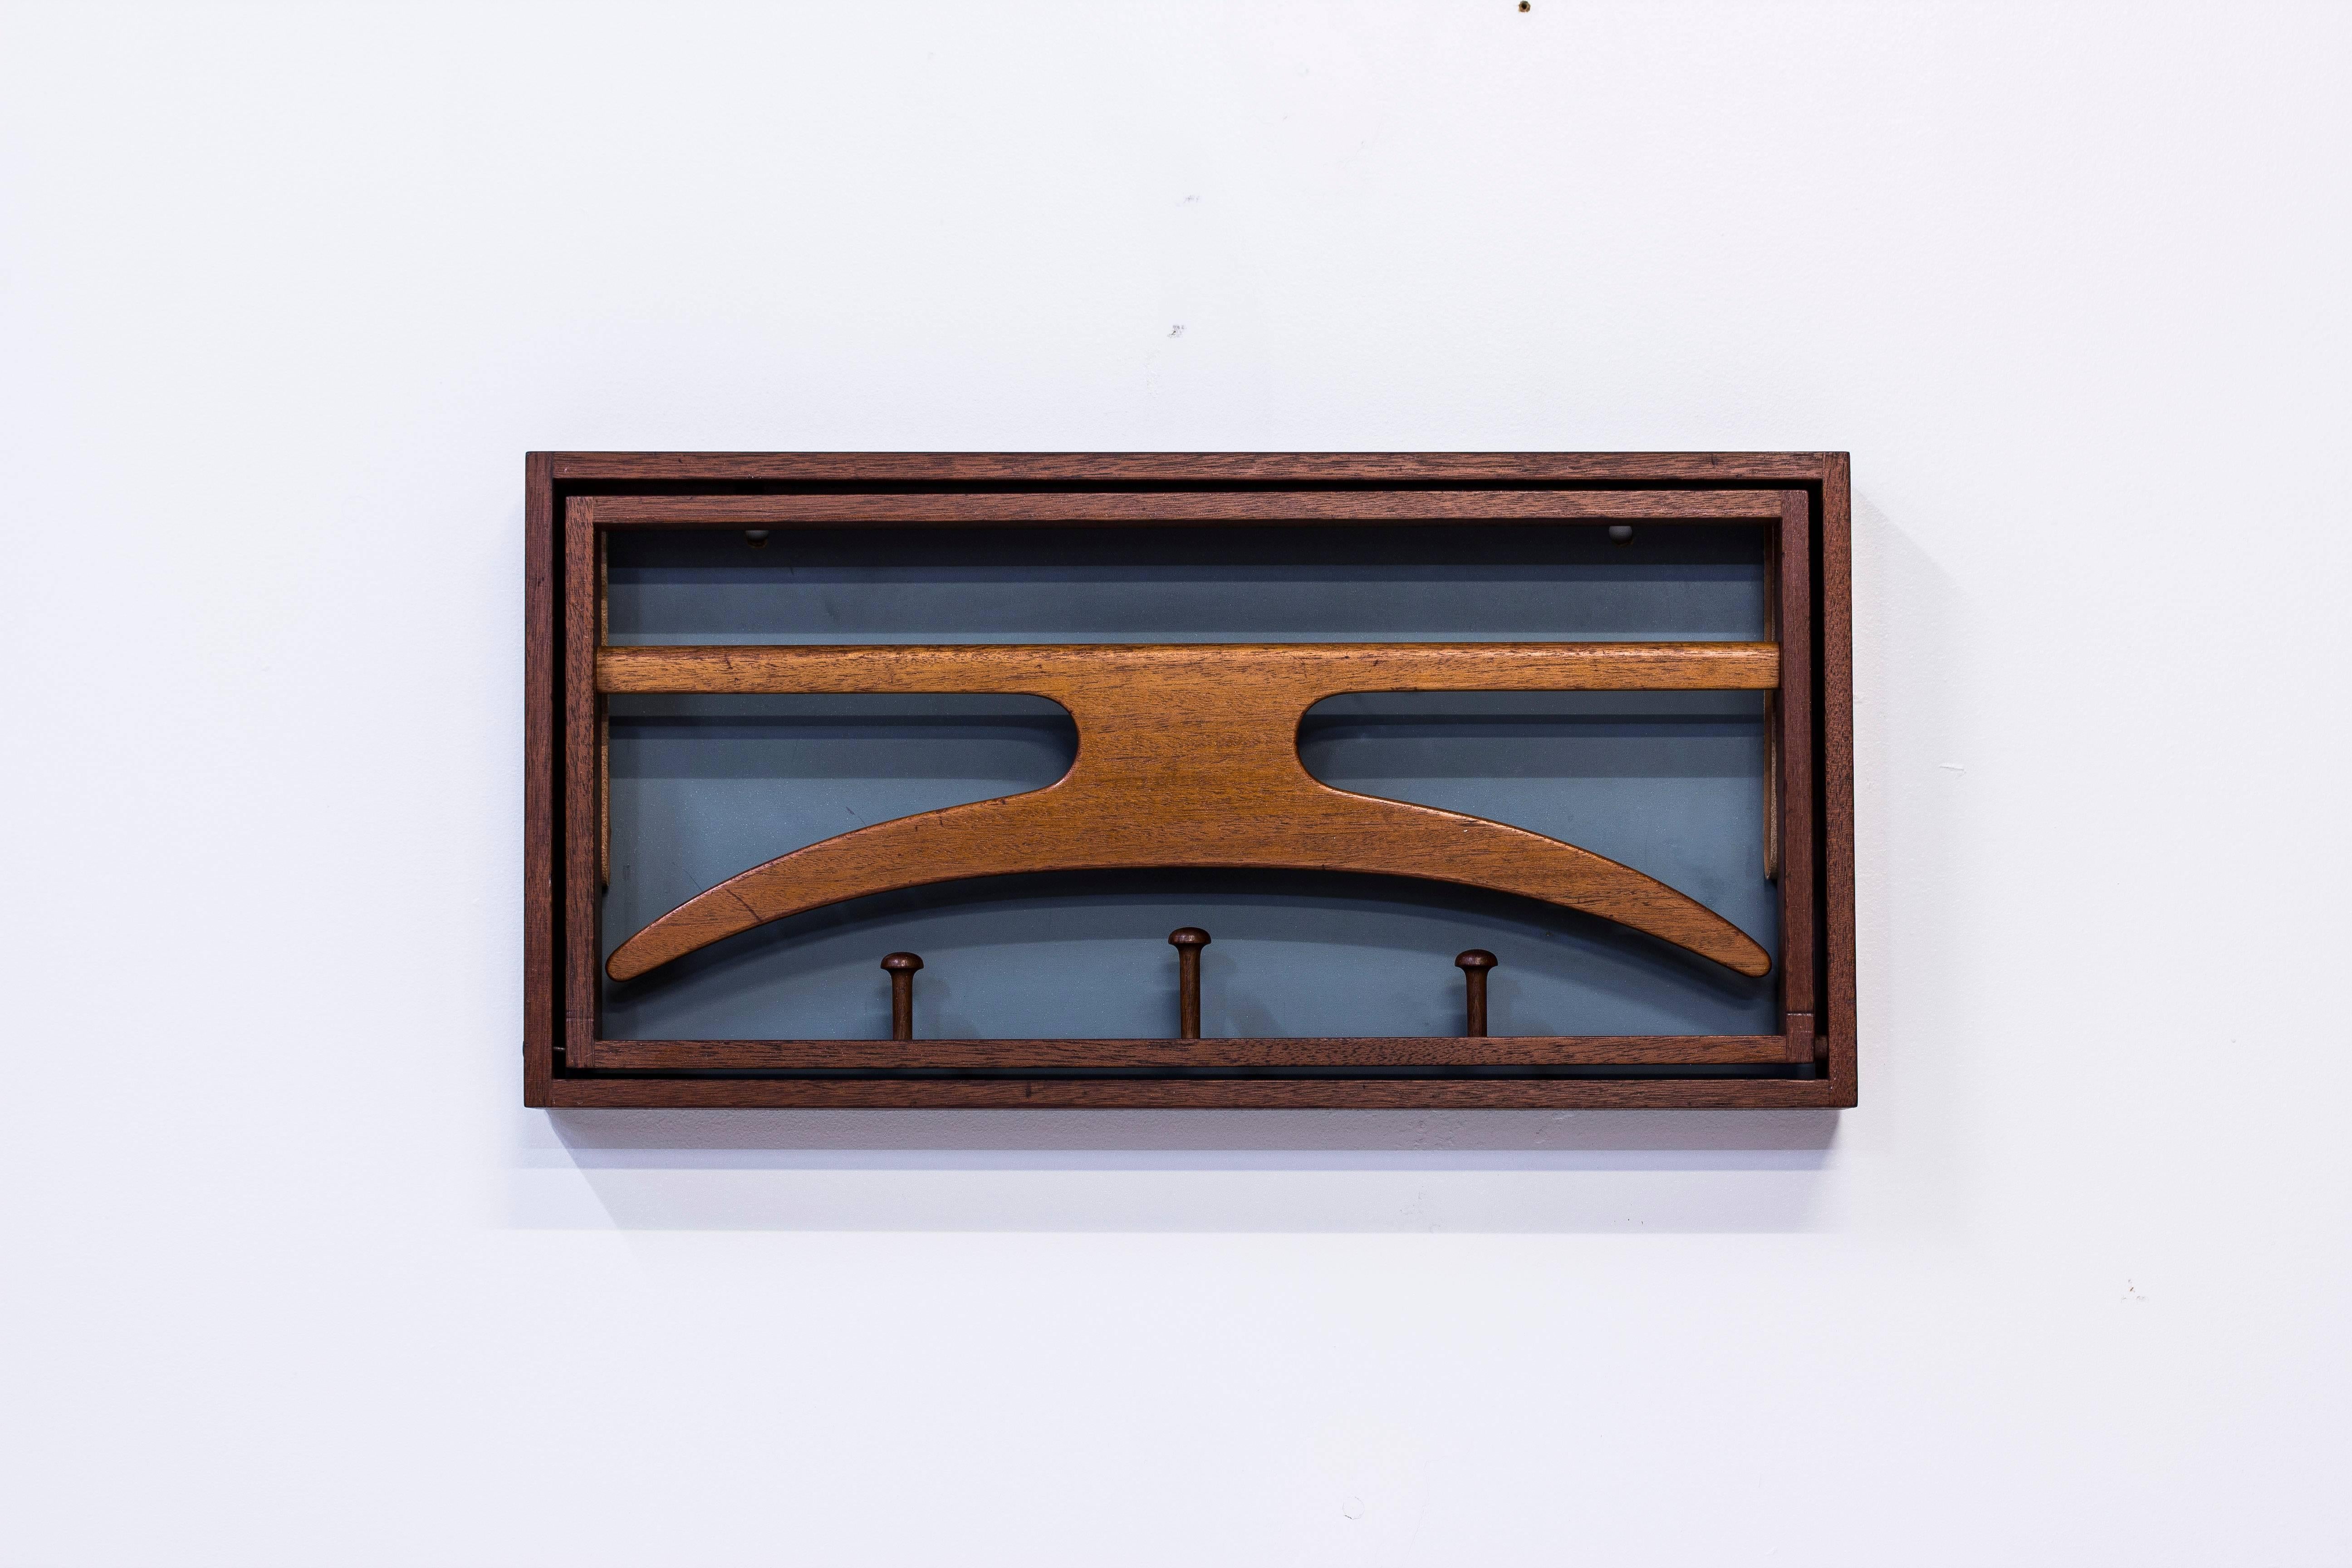 Wall-mounted valet designed by Adam Hoff & Poul Østergaard. produced in Denmark during the late 1950s by Virum Møbelsnedkeri. Solid teak frame with visible joinery, original leather straps and lacquered back part. Very good condition with light wear